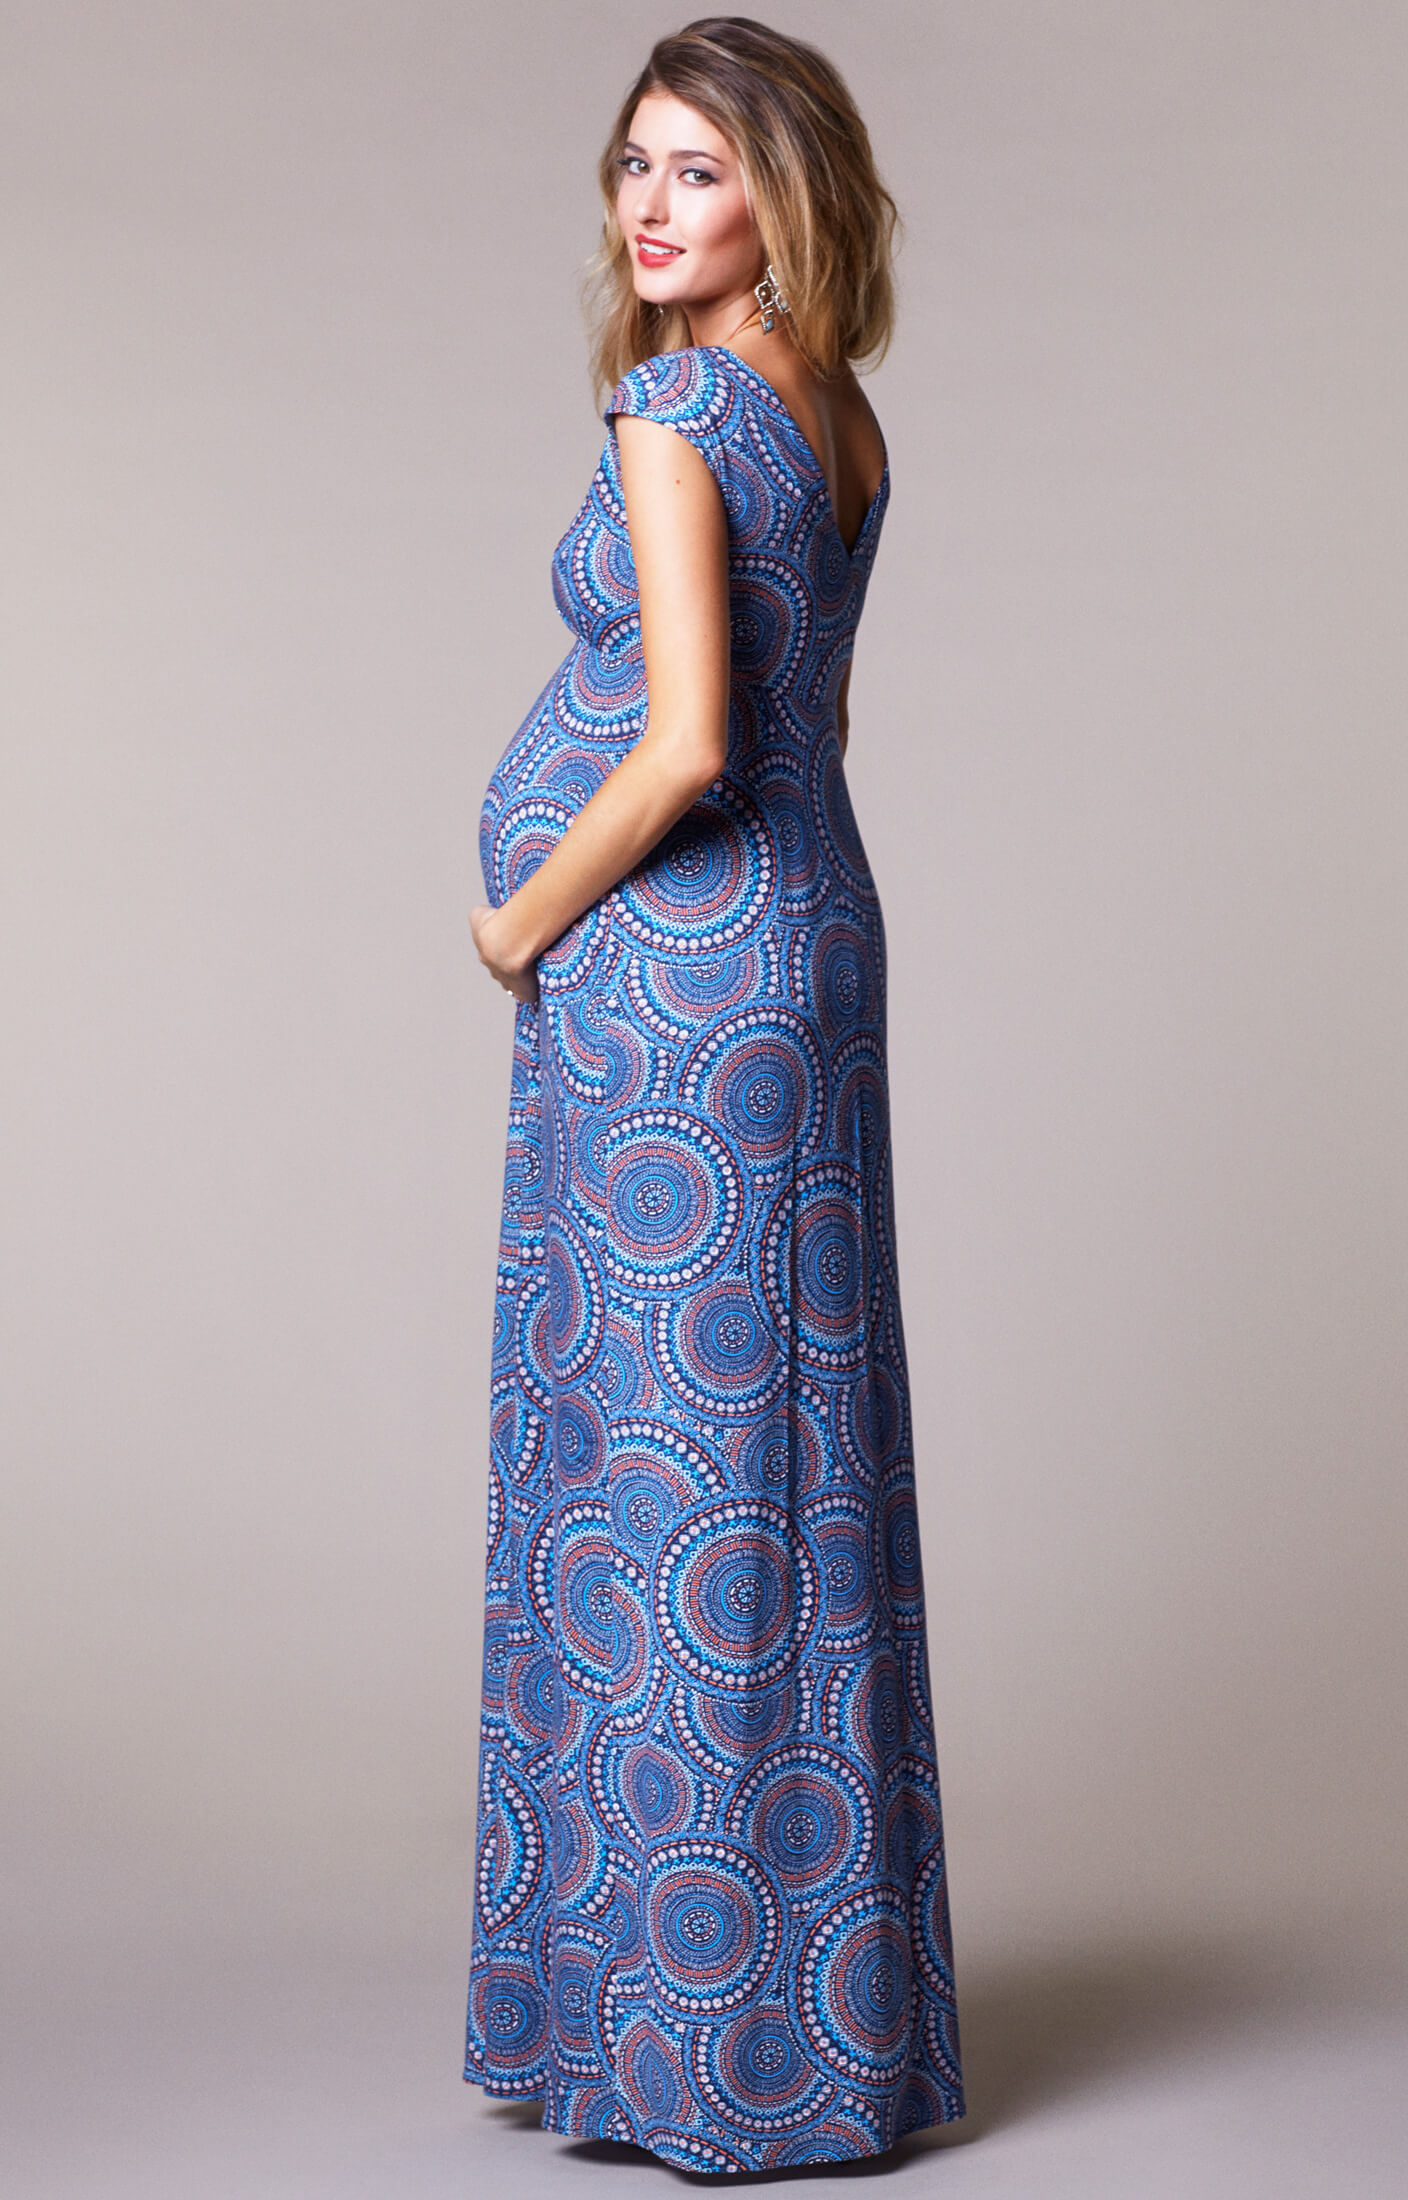 Amazing Maternity Maxi Dresses For Weddings in the world The ultimate guide 